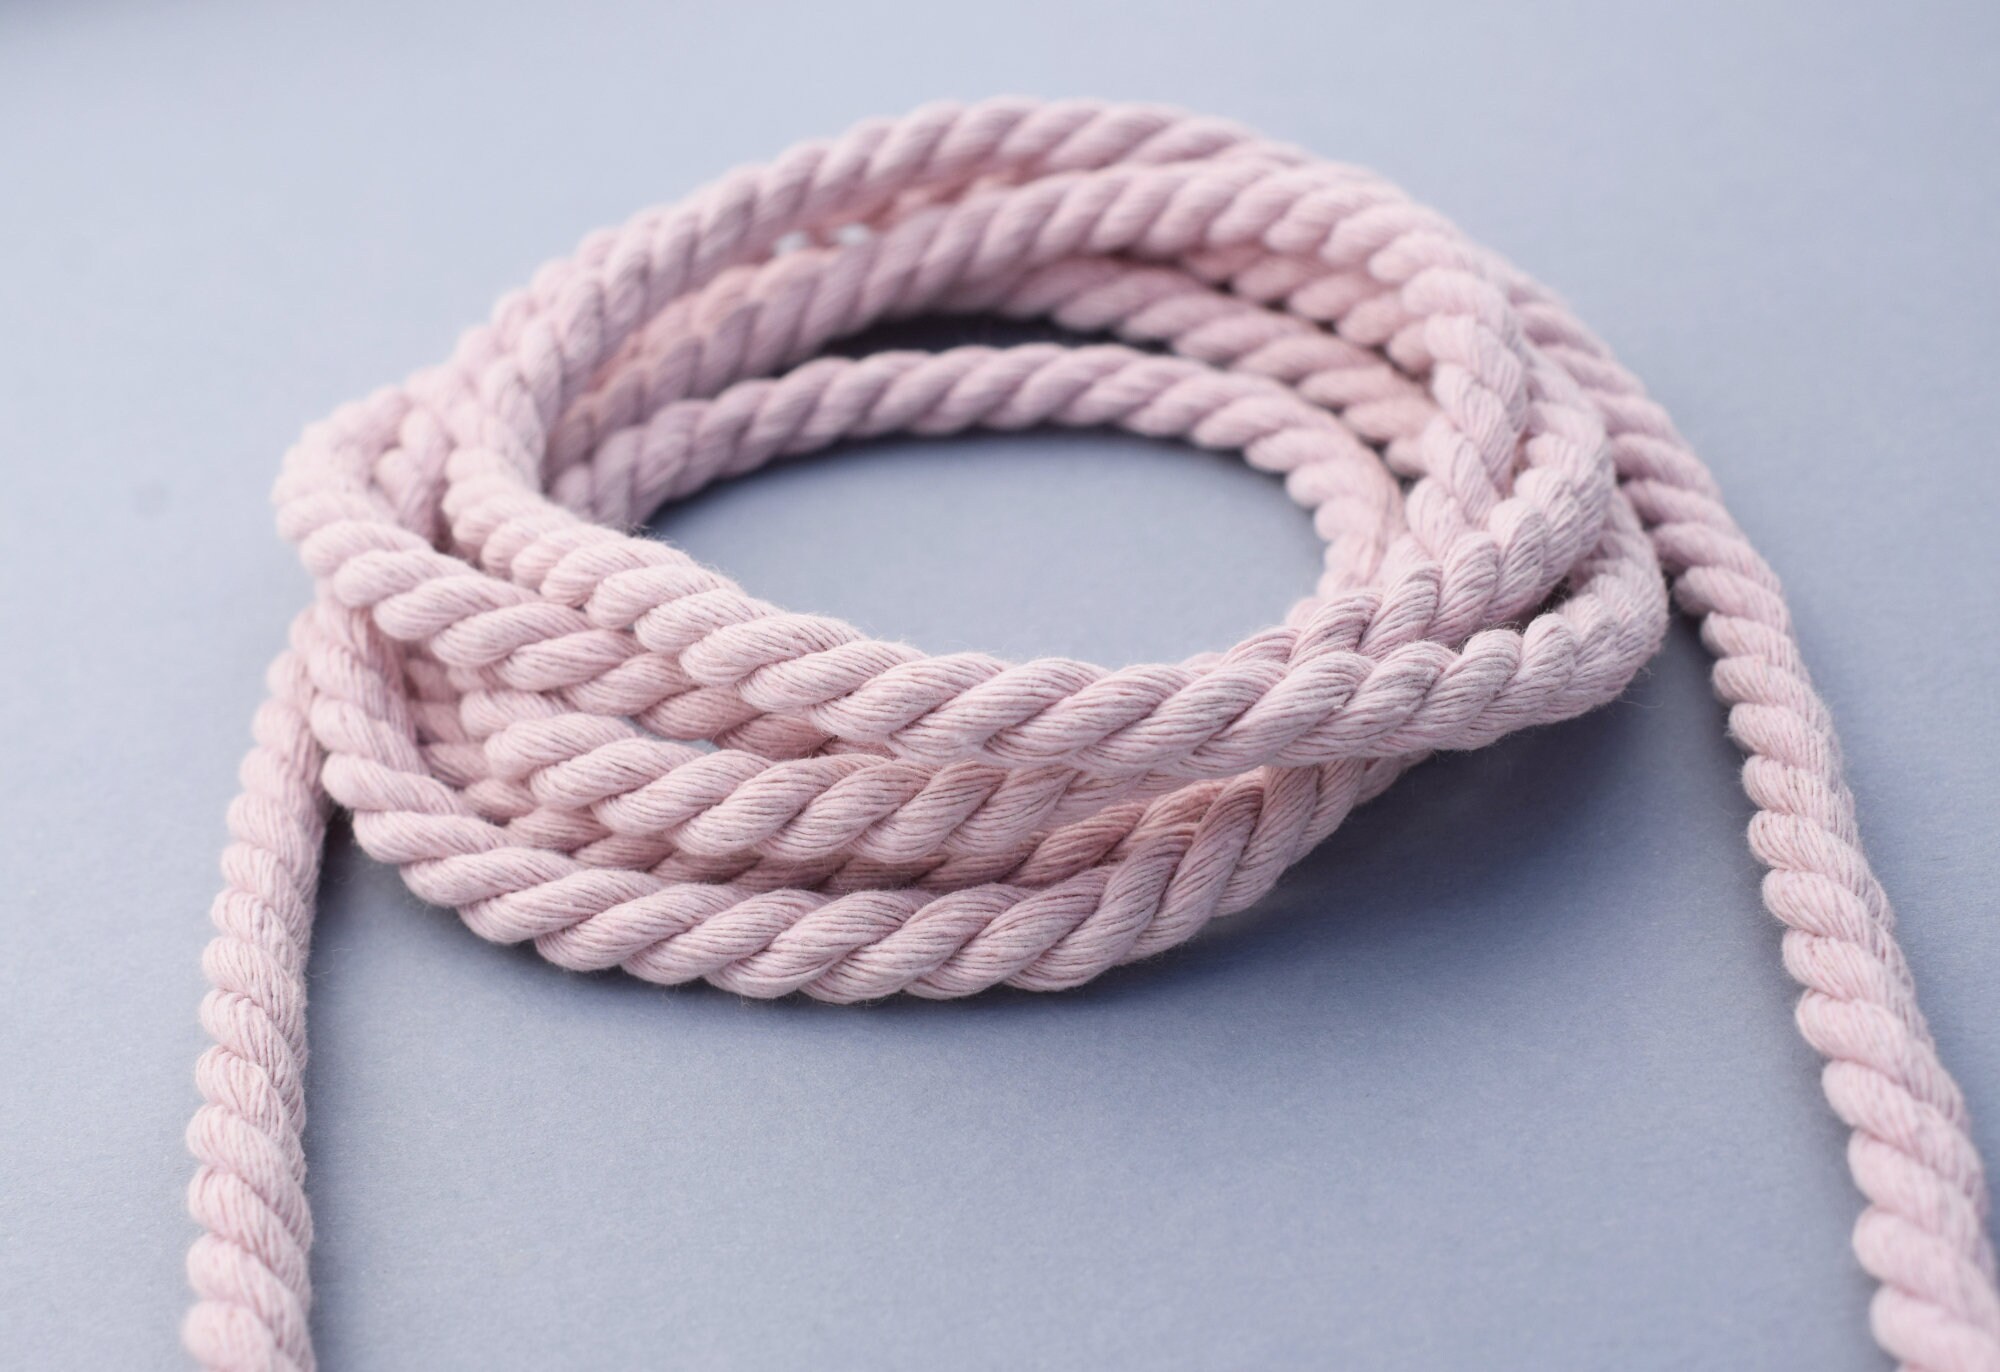 6mm Cotton Cord, Powder Pink Twisted Cotton Rope 6mm, Powder Pink